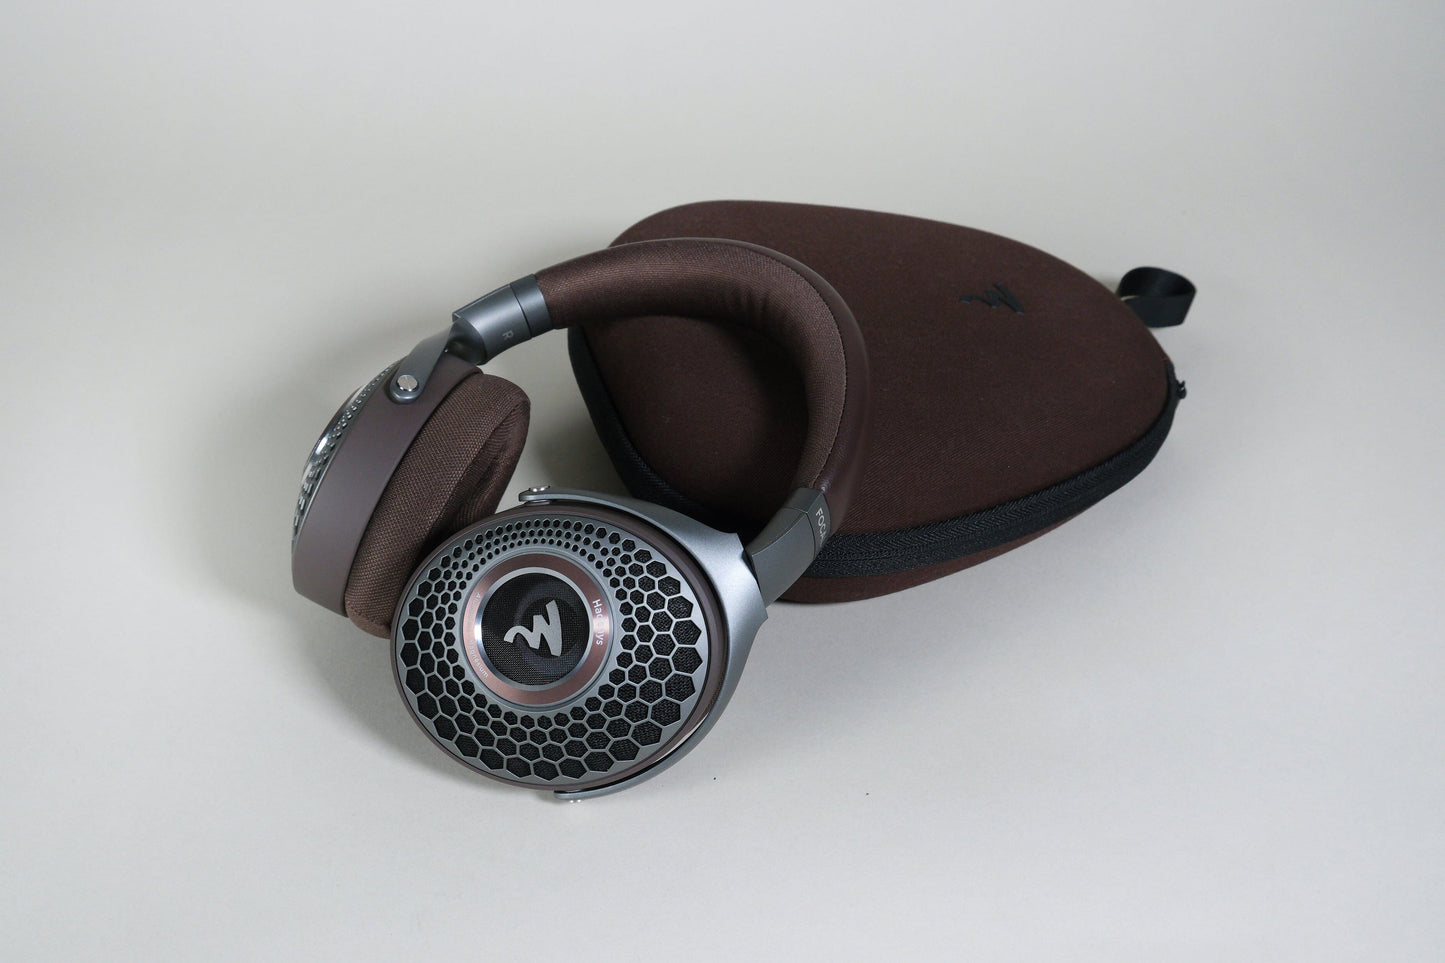 Focal Hadenys Open-back Dynamic Driver Headphones made in France - Headphones.com